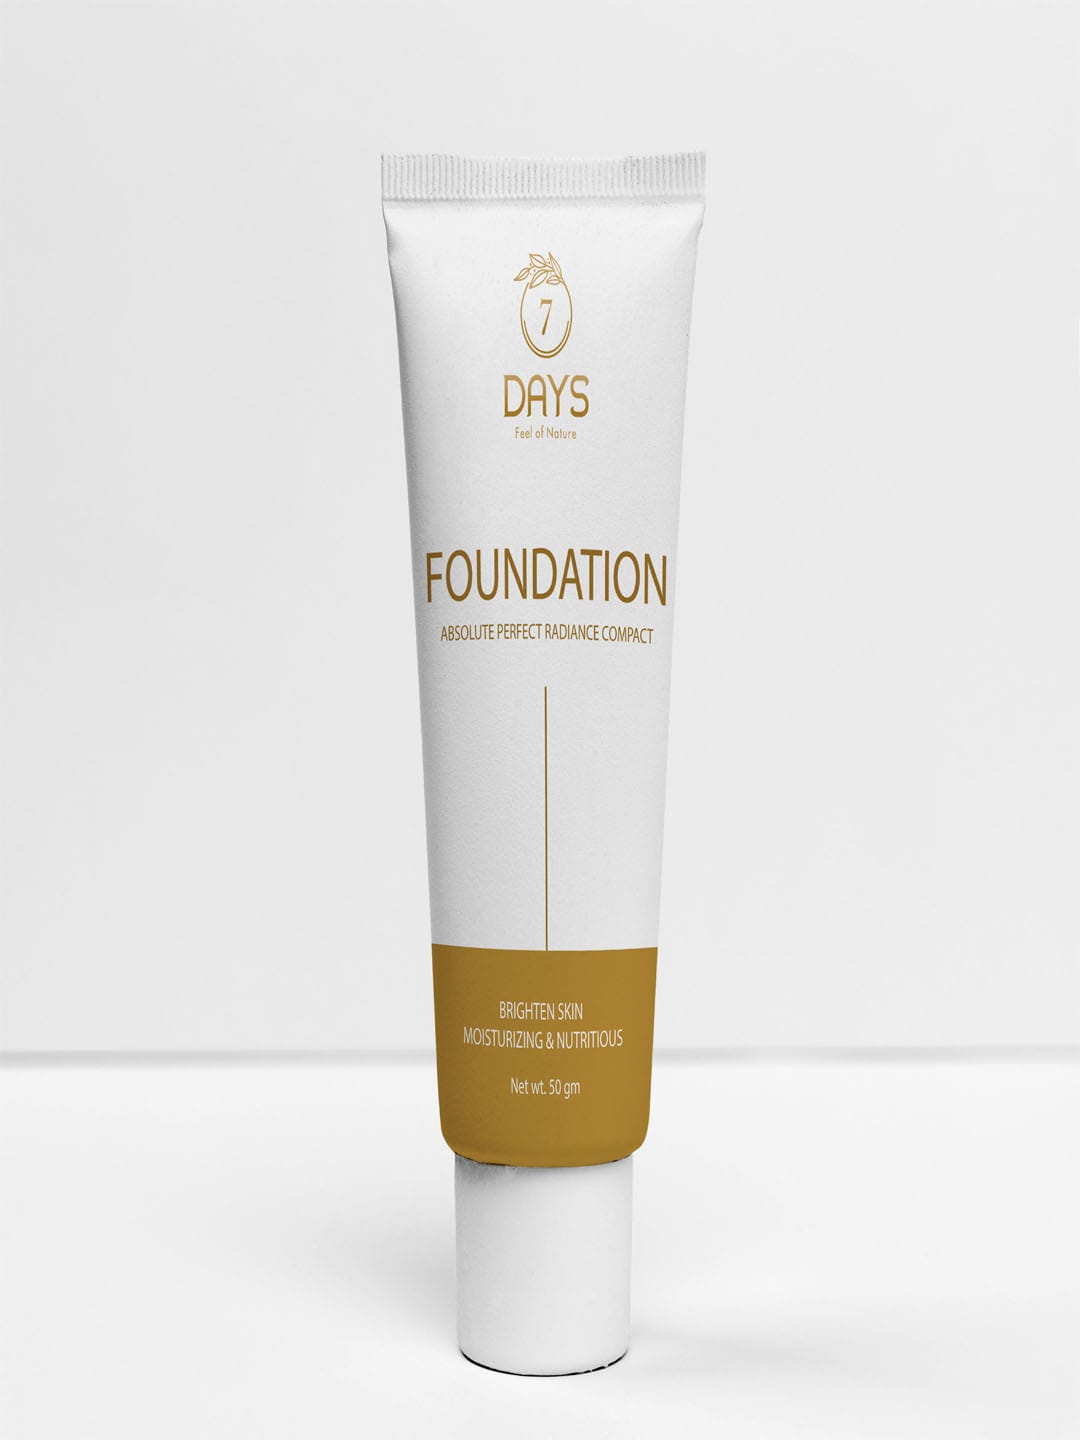 7 DAYS Foundation Cream for Perfect Glow Skin - 50g Price in India